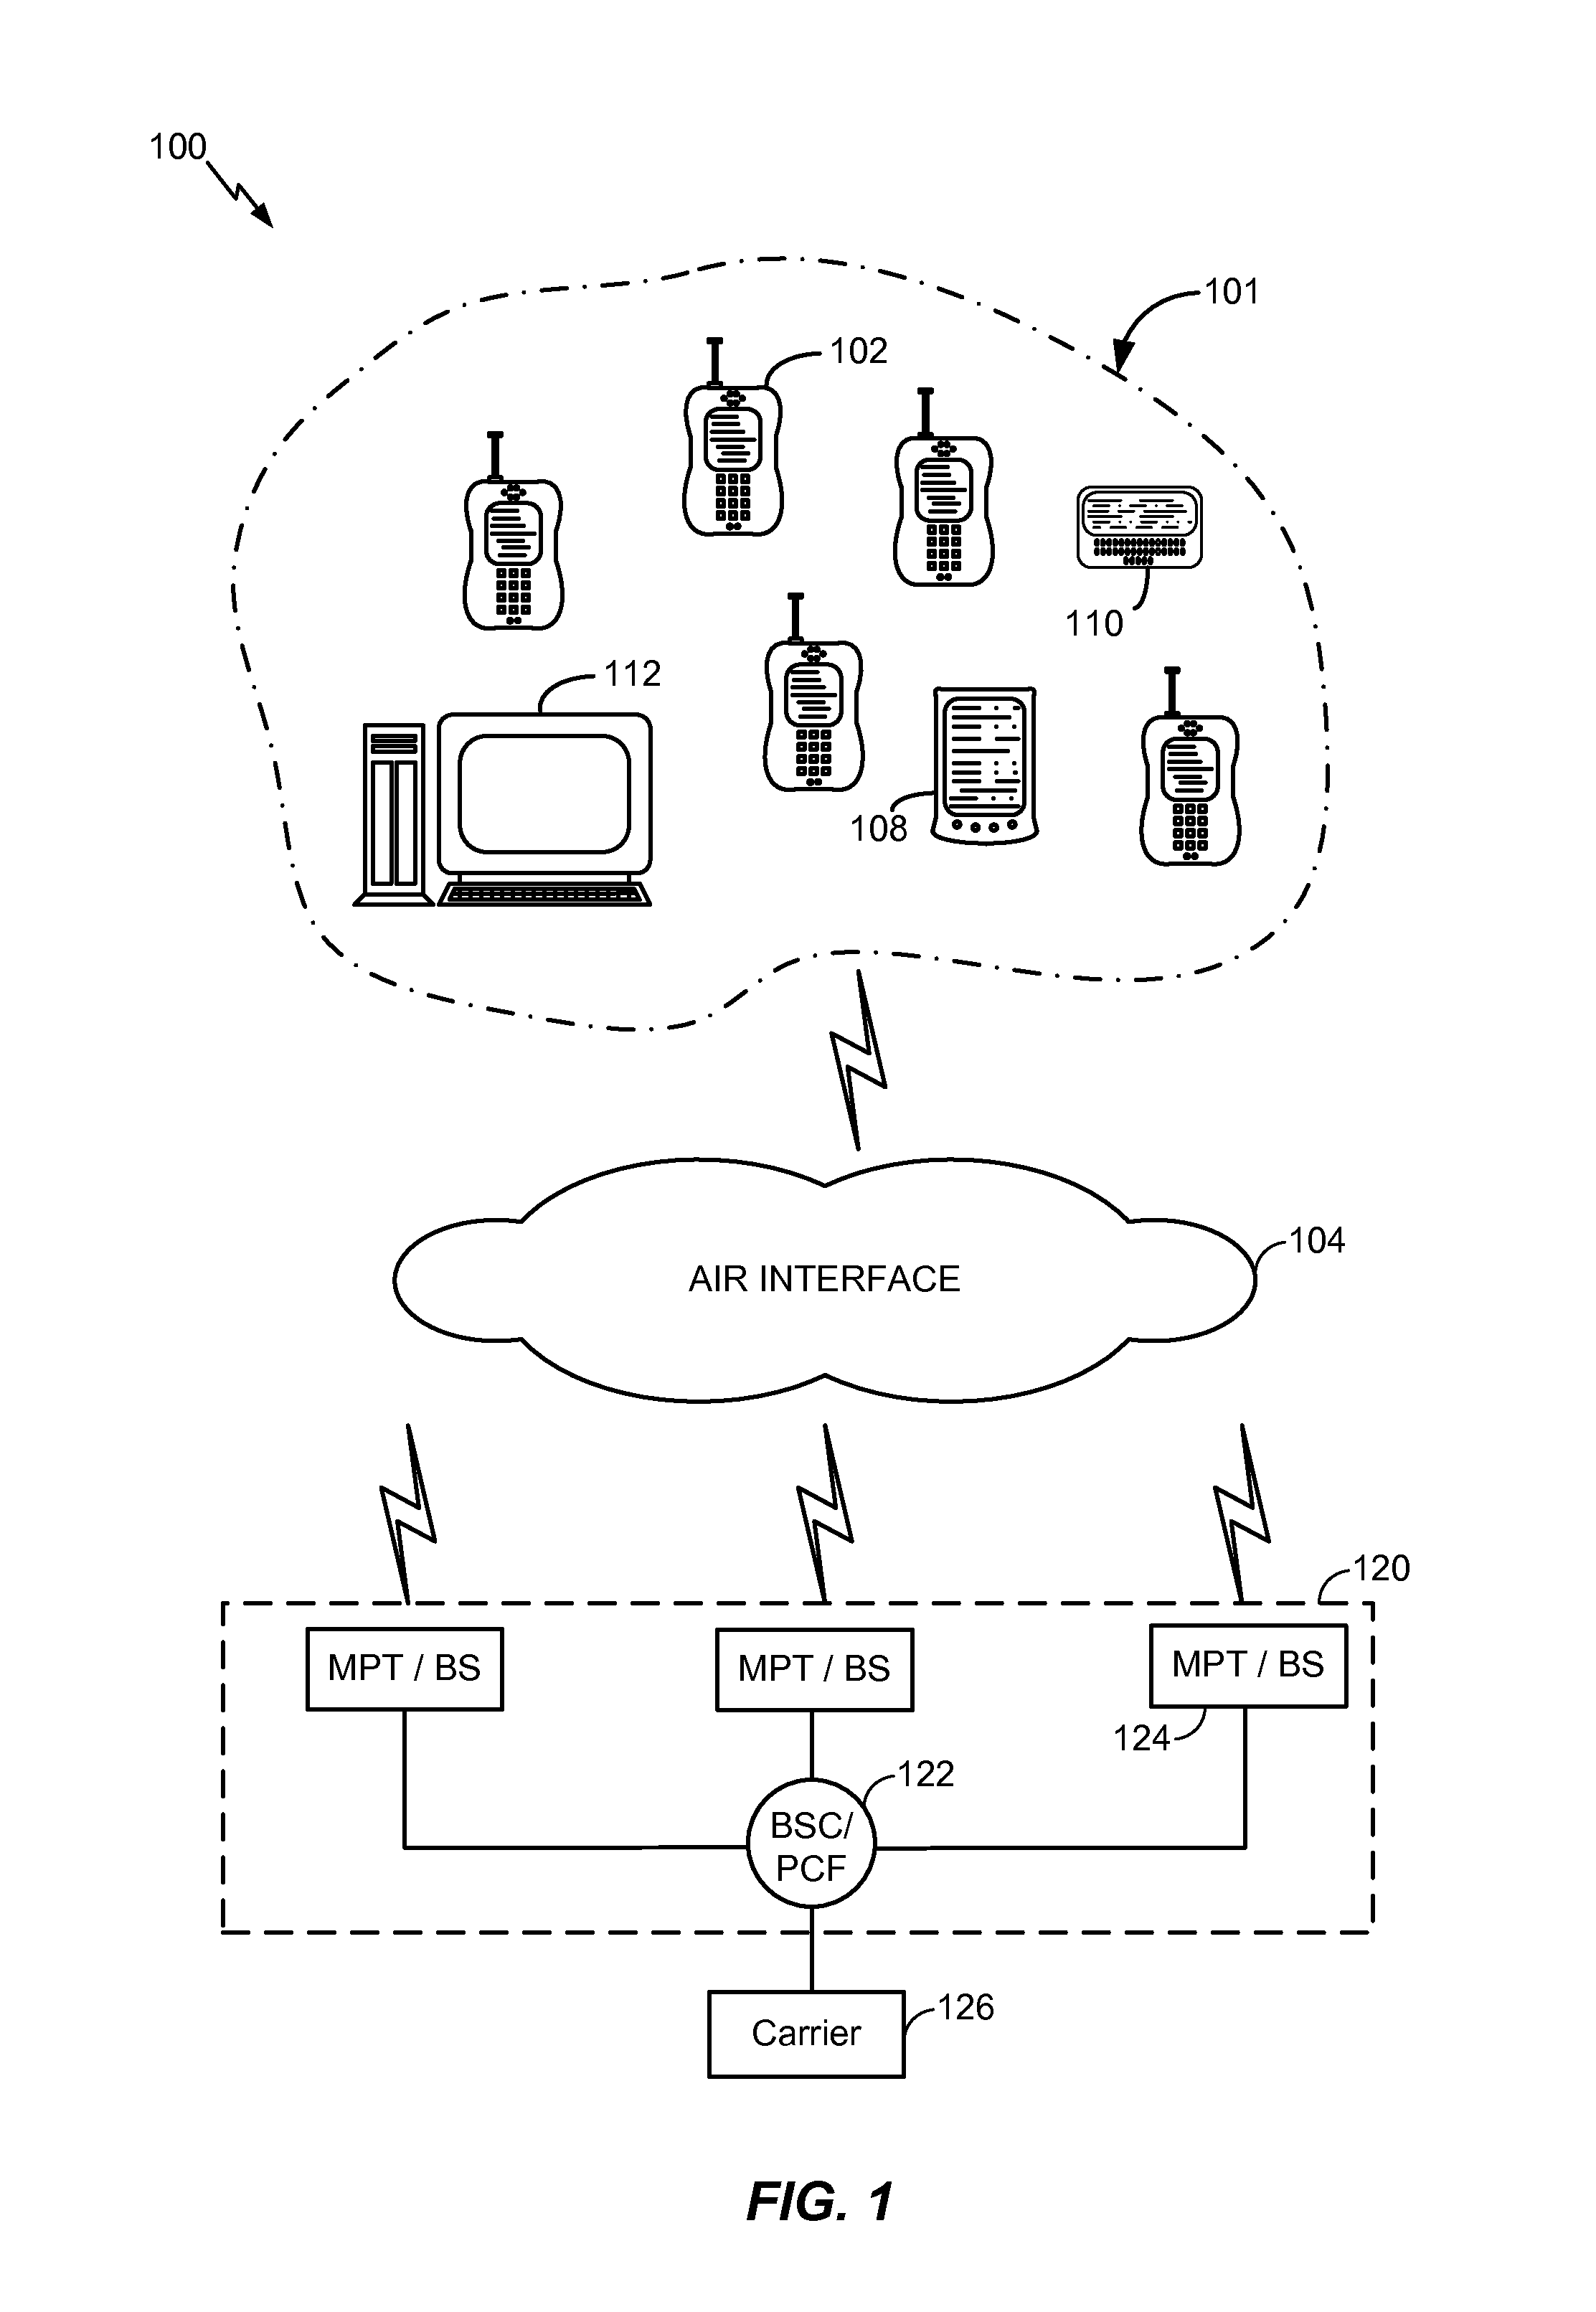 Application-layer handoff of an access terminal from a first system of an access network to a second system of the access network during a communication session within a wireless communications system